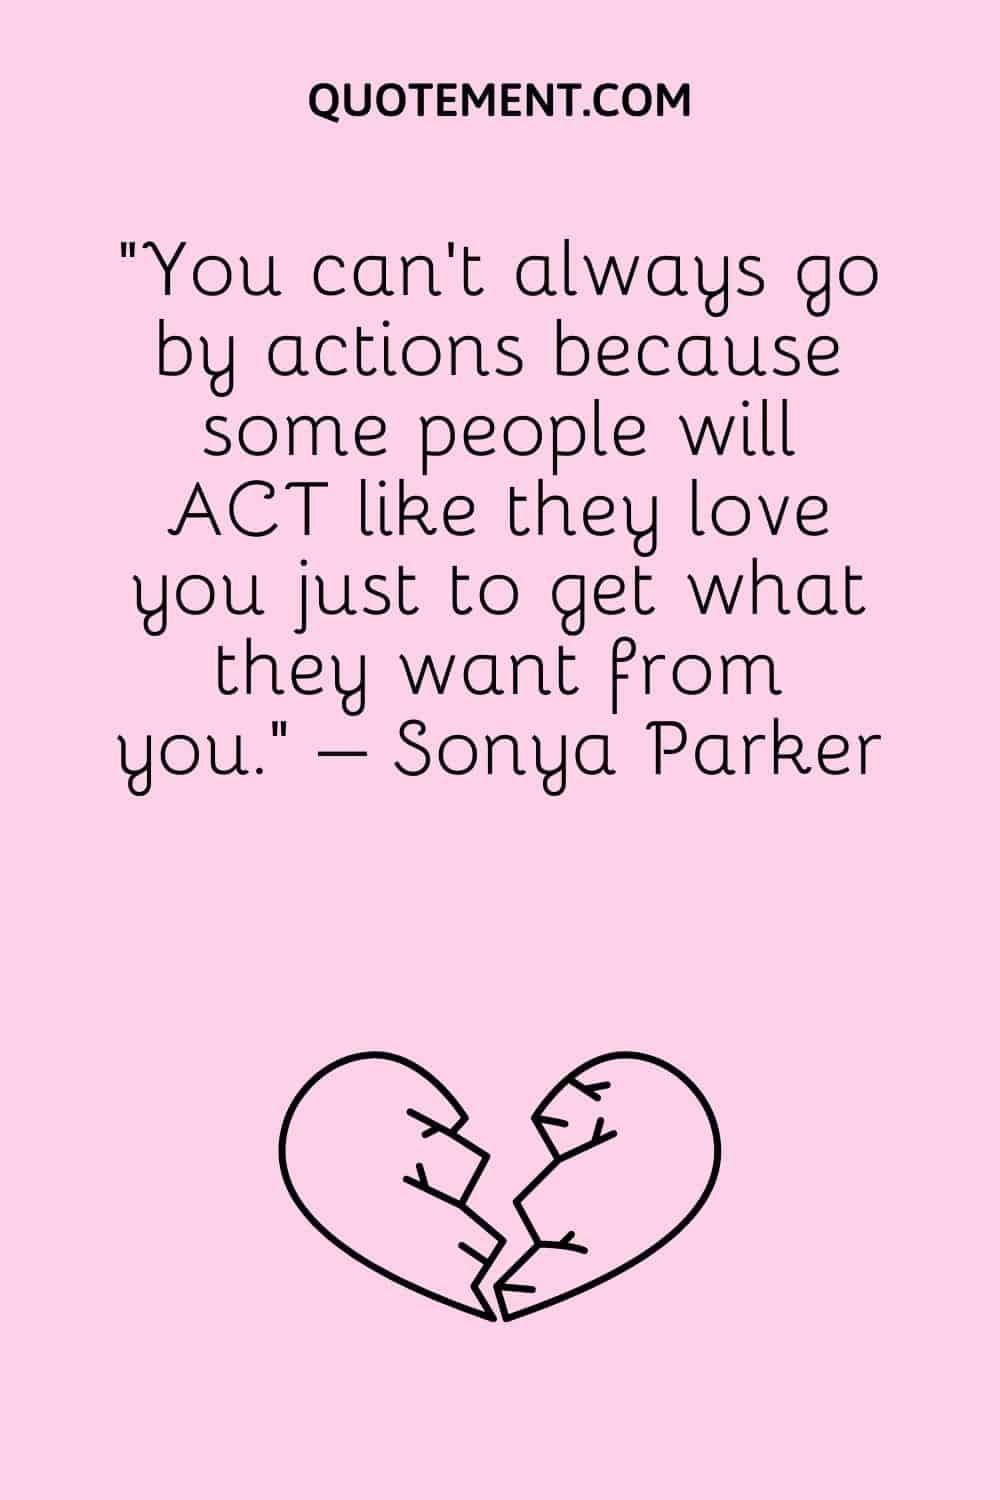 “You can’t always go by actions because some people will ACT like they love you just to get what they want from you.” – Sonya Parker